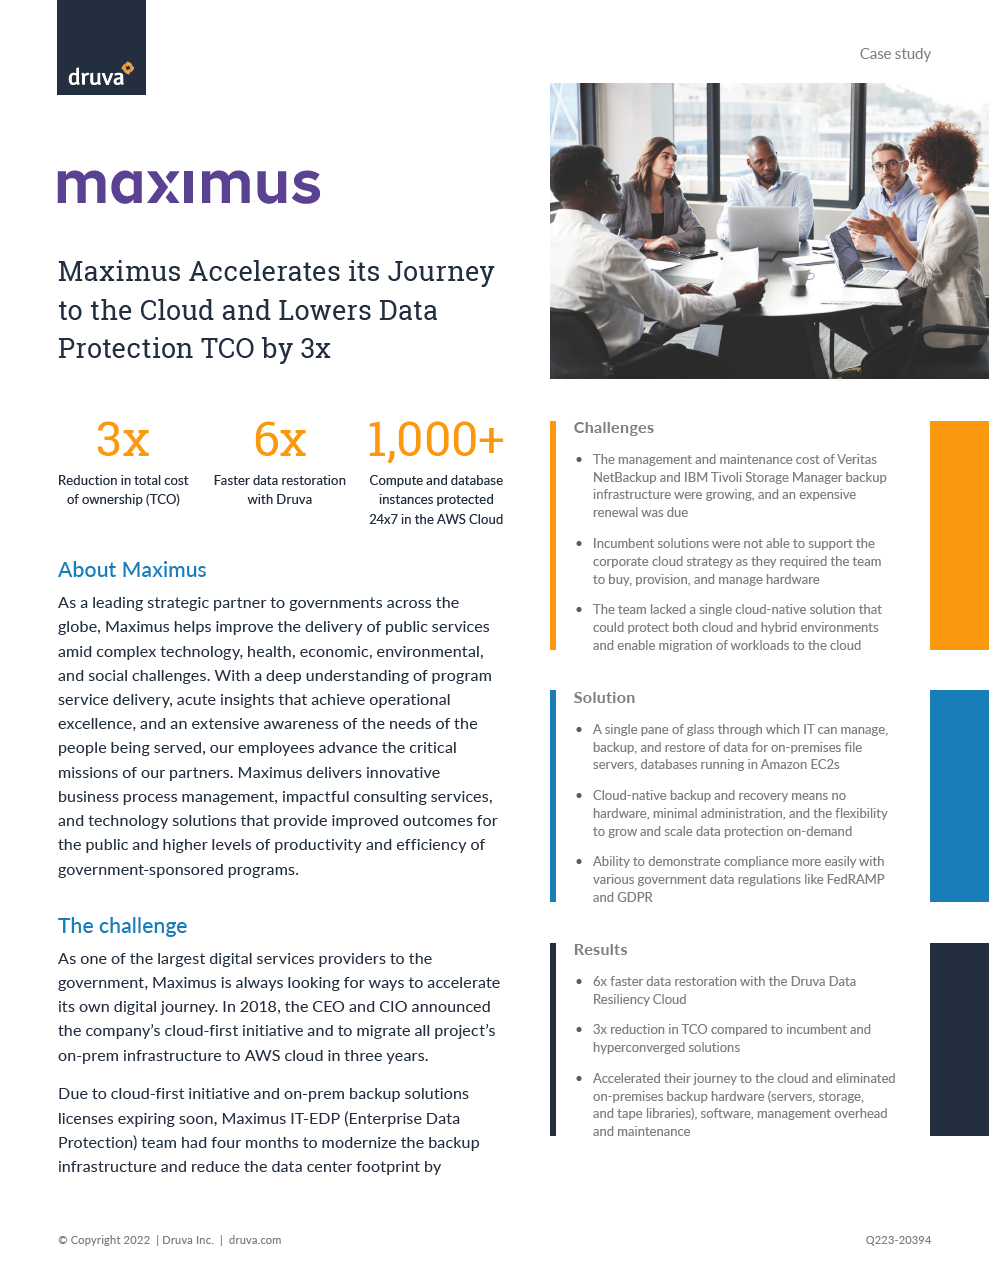 Maximus accelerates its journey to the cloud and lowers data protection TCO by 3x